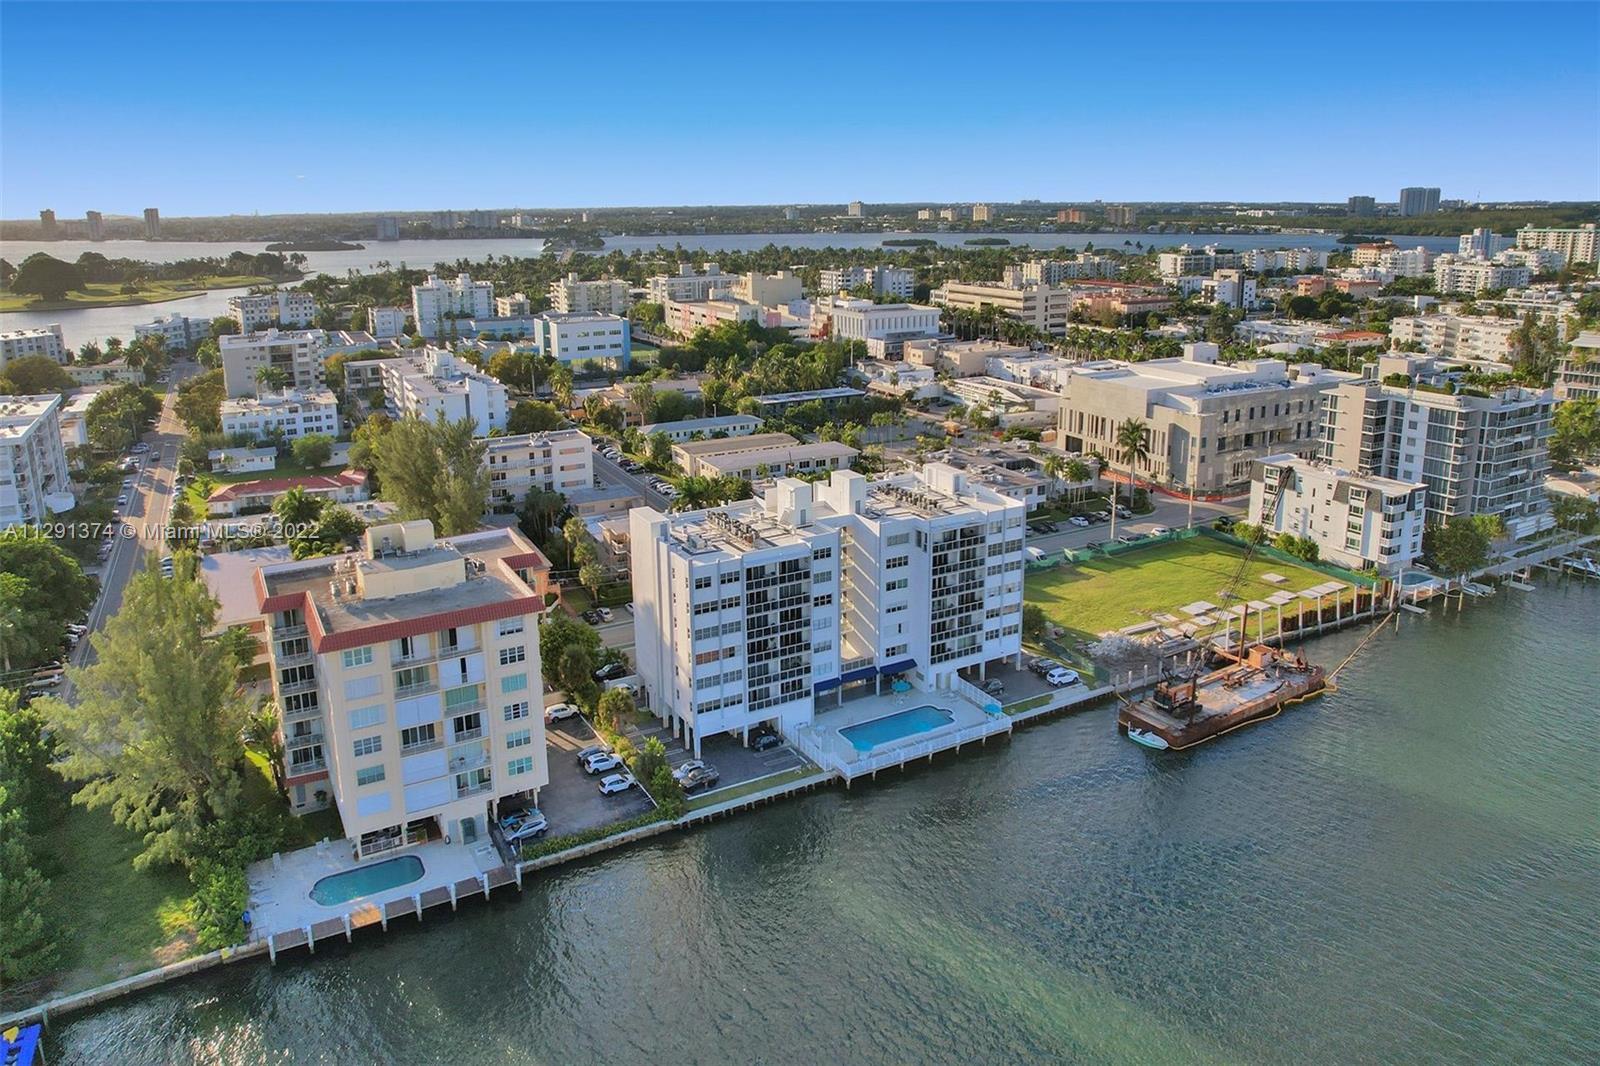 Photo 7 of London Towers Condo in Bay Harbor Islands - MLS A11291374